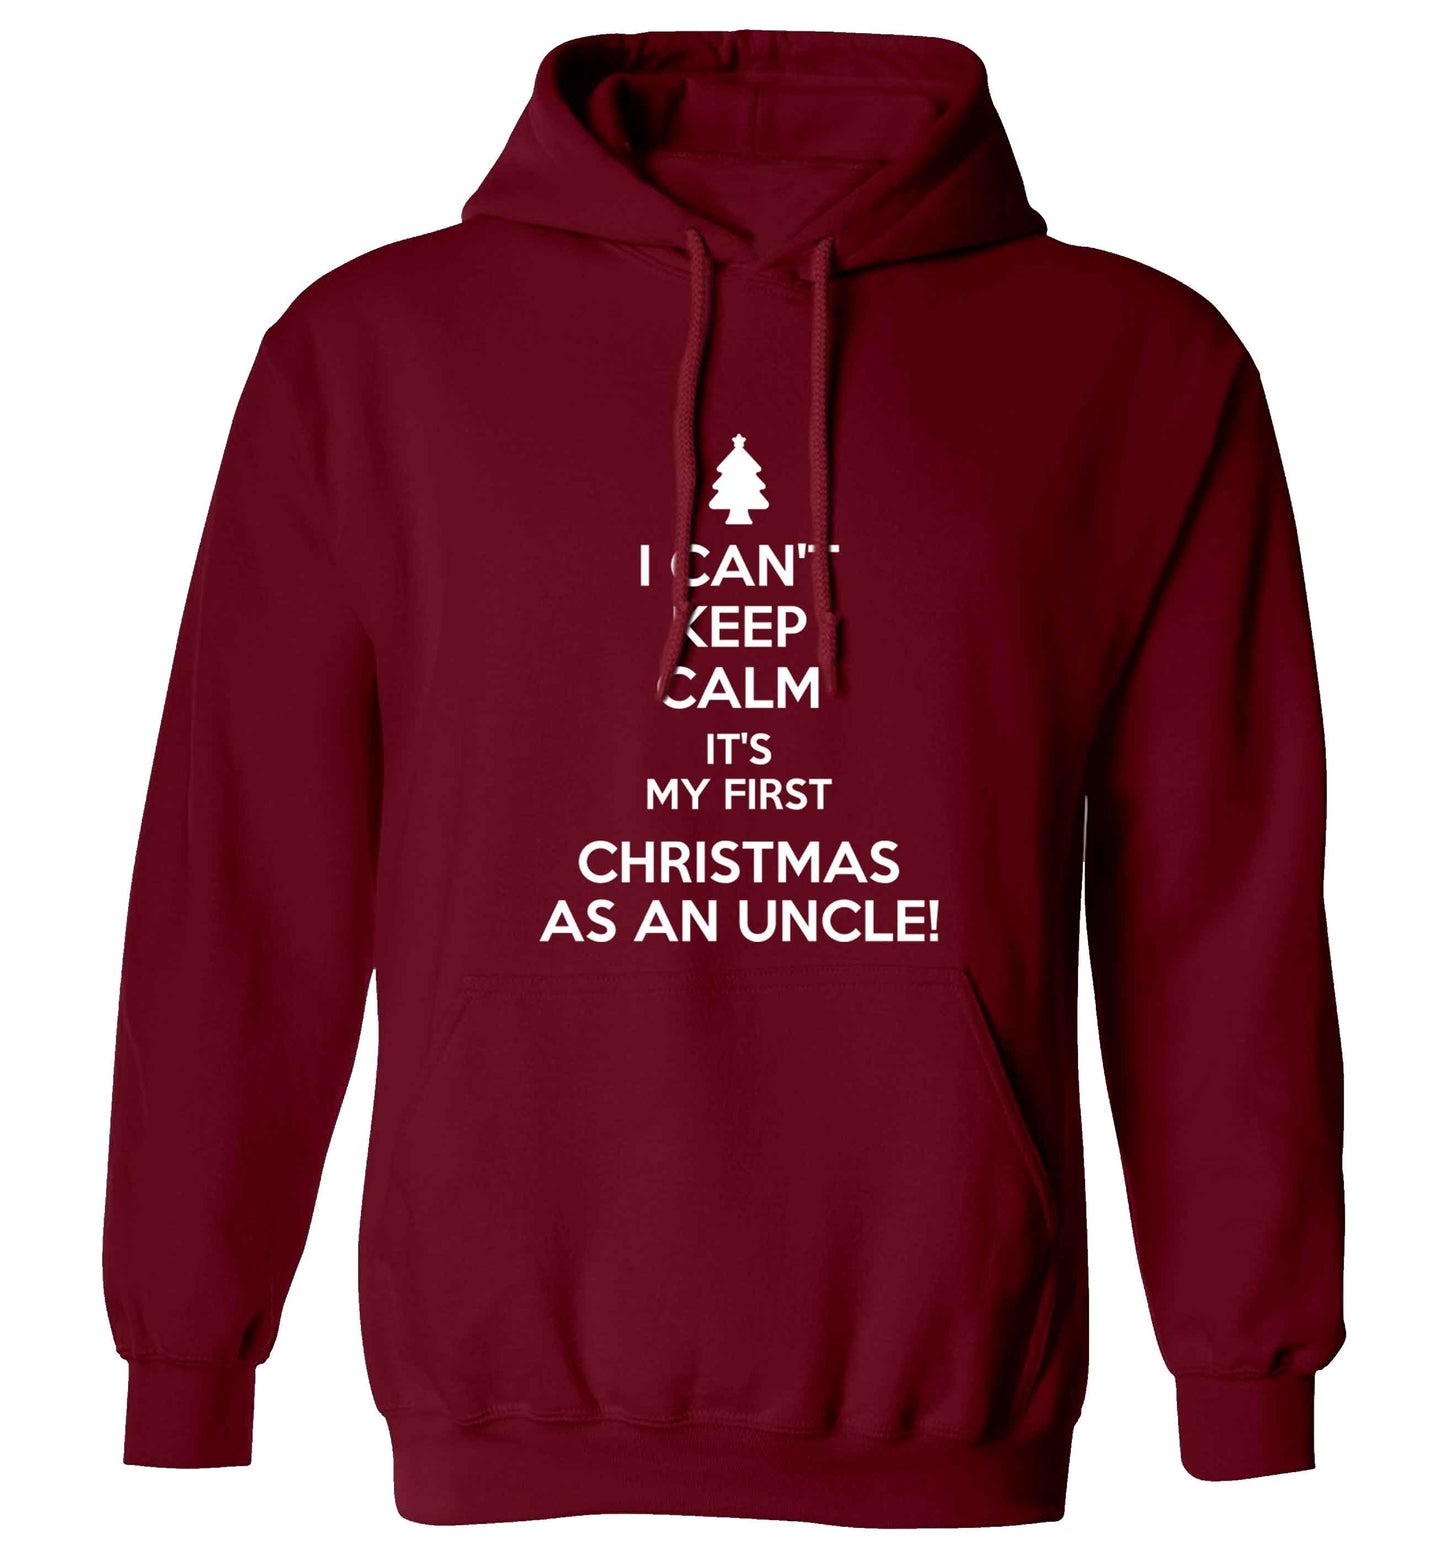 I can't keep calm it's my first Christmas as an uncle! adults unisex maroon hoodie 2XL